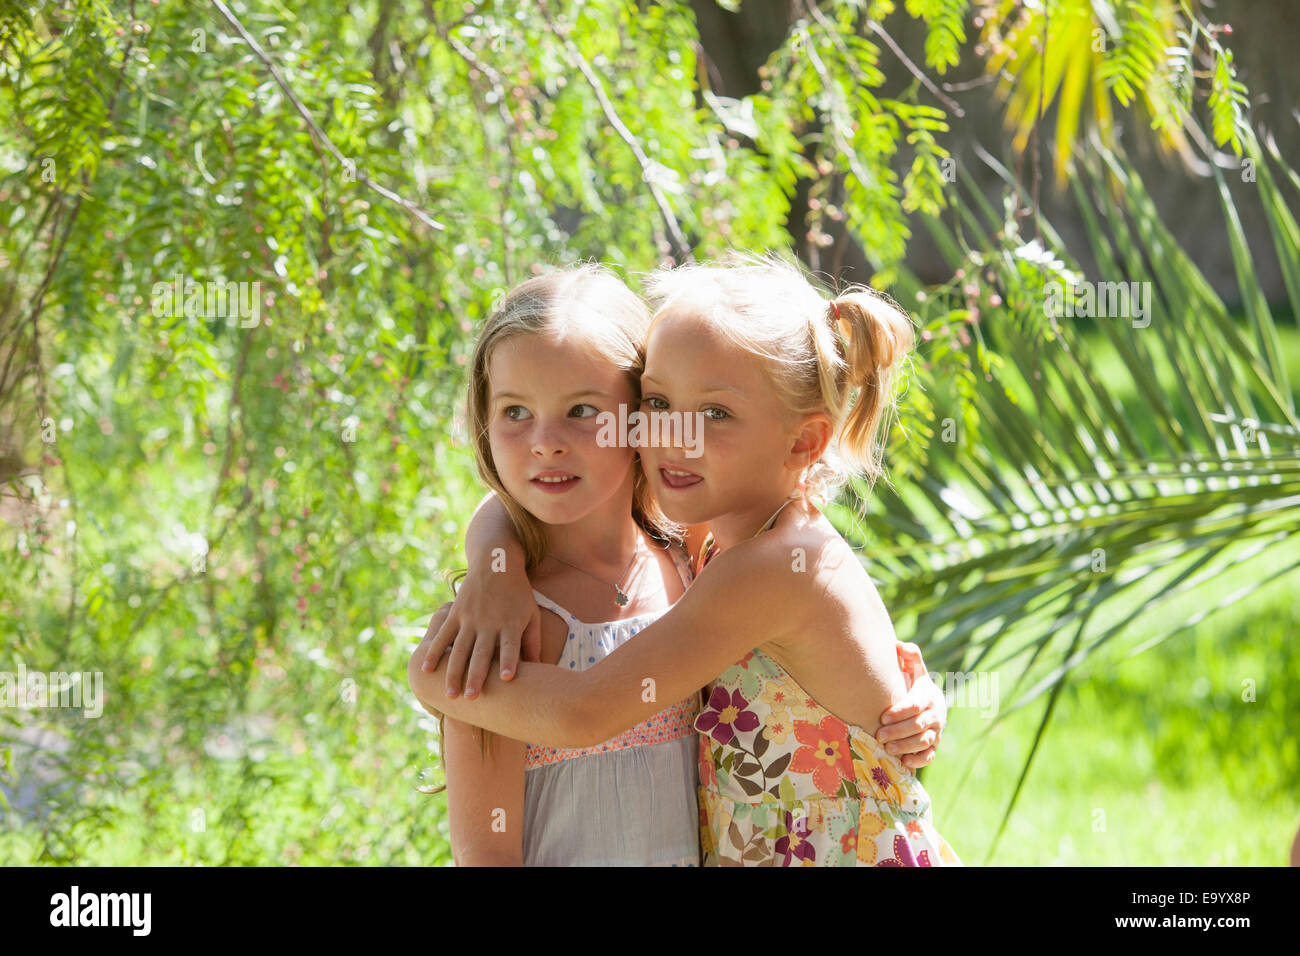 Candid portrait of two girls with arms around each other in garden Stock Photo